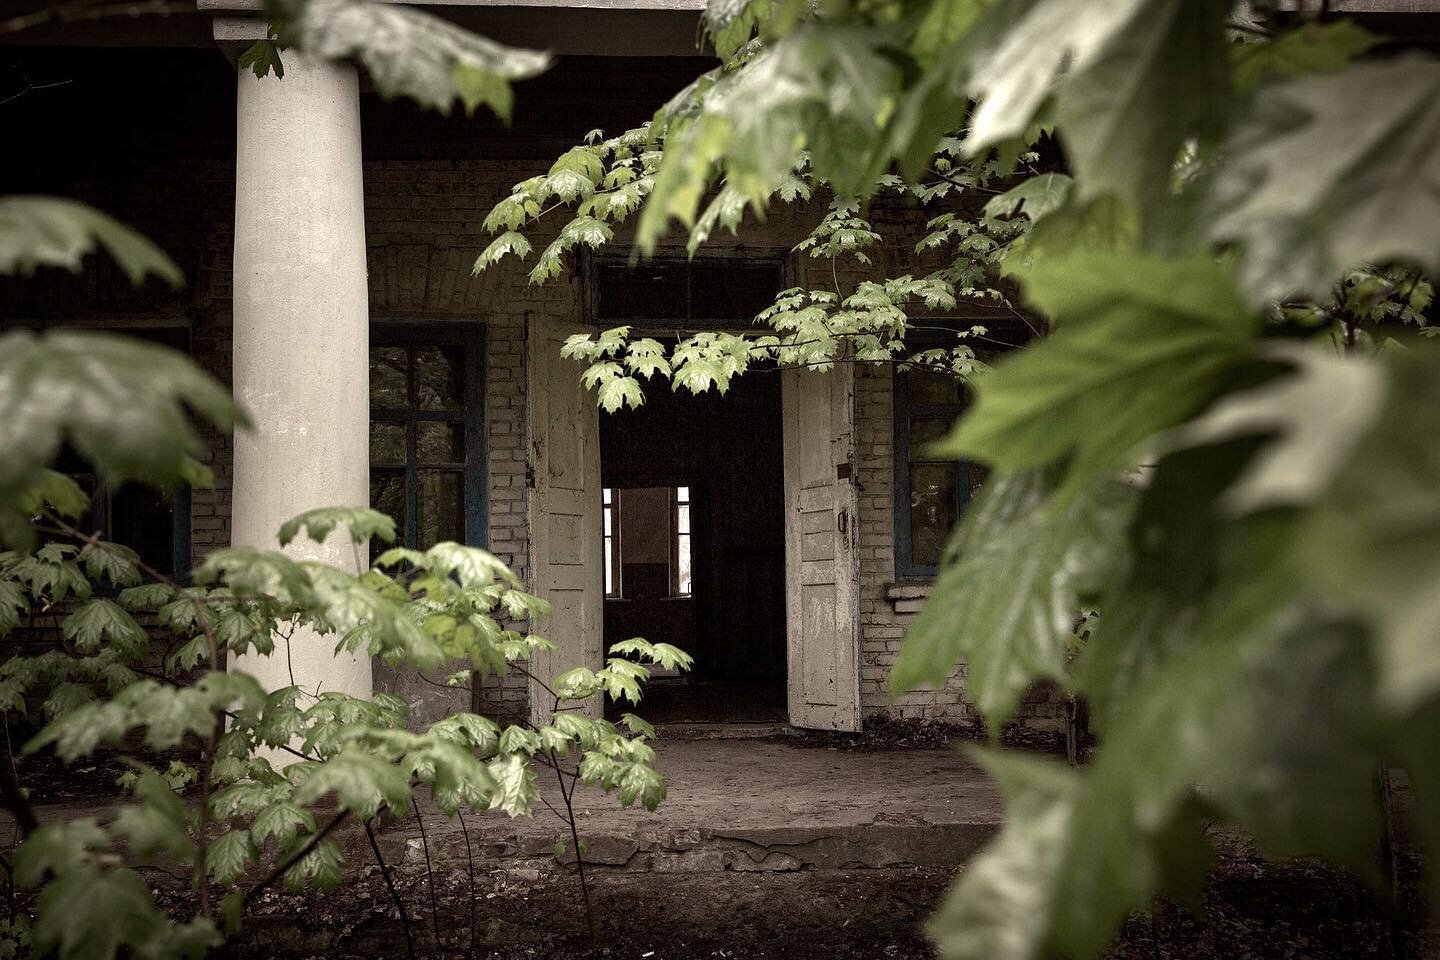 The entrance at Kopachi kindergarten, Chernobyl Exclusion Zone.

Photographed May 2015.

#chernobyl #kopachi #chernobylexclusionzone #kindergarten #abandoned #abandonedplaces #abandoned_junkies #urbex #urbexpeople #decay #ukraine